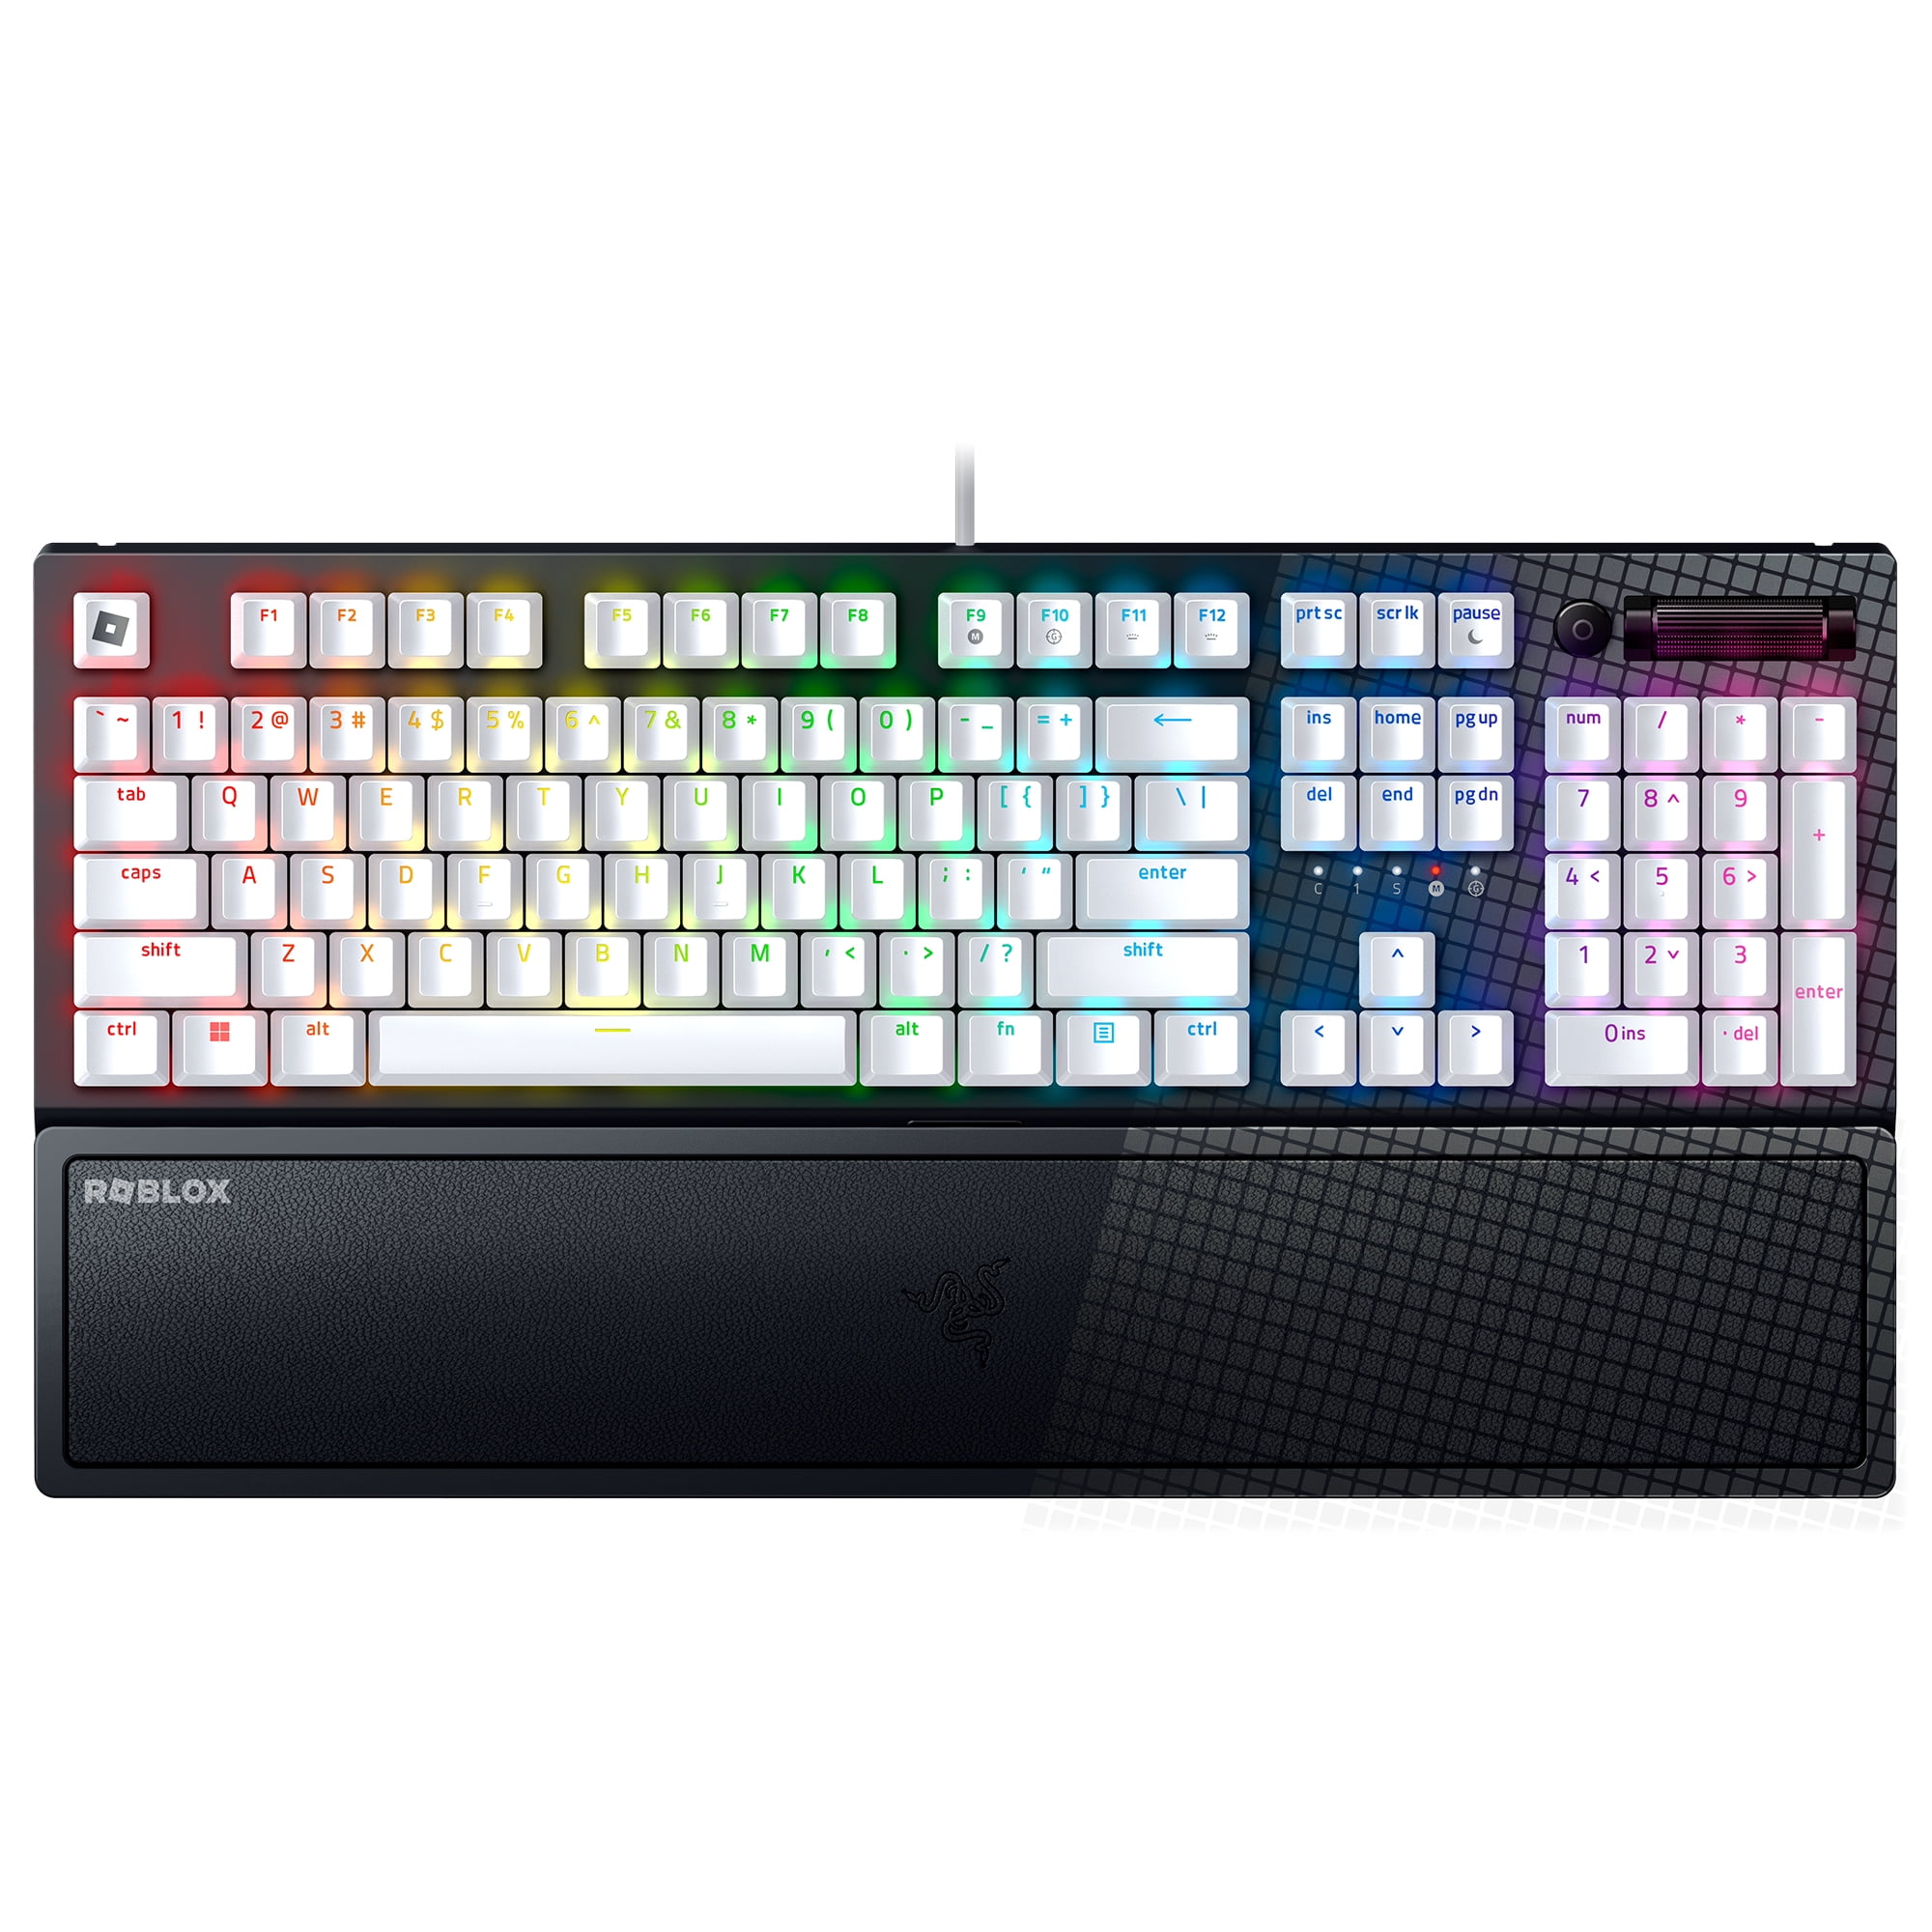  Logitech G413 SE Full-Size Mechanical Gaming Keyboard - Backlit  Keyboard with Tactile Mechanical Switches, Anti-Ghosting, Compatible with  Windows, macOS - Black Aluminum : Video Games